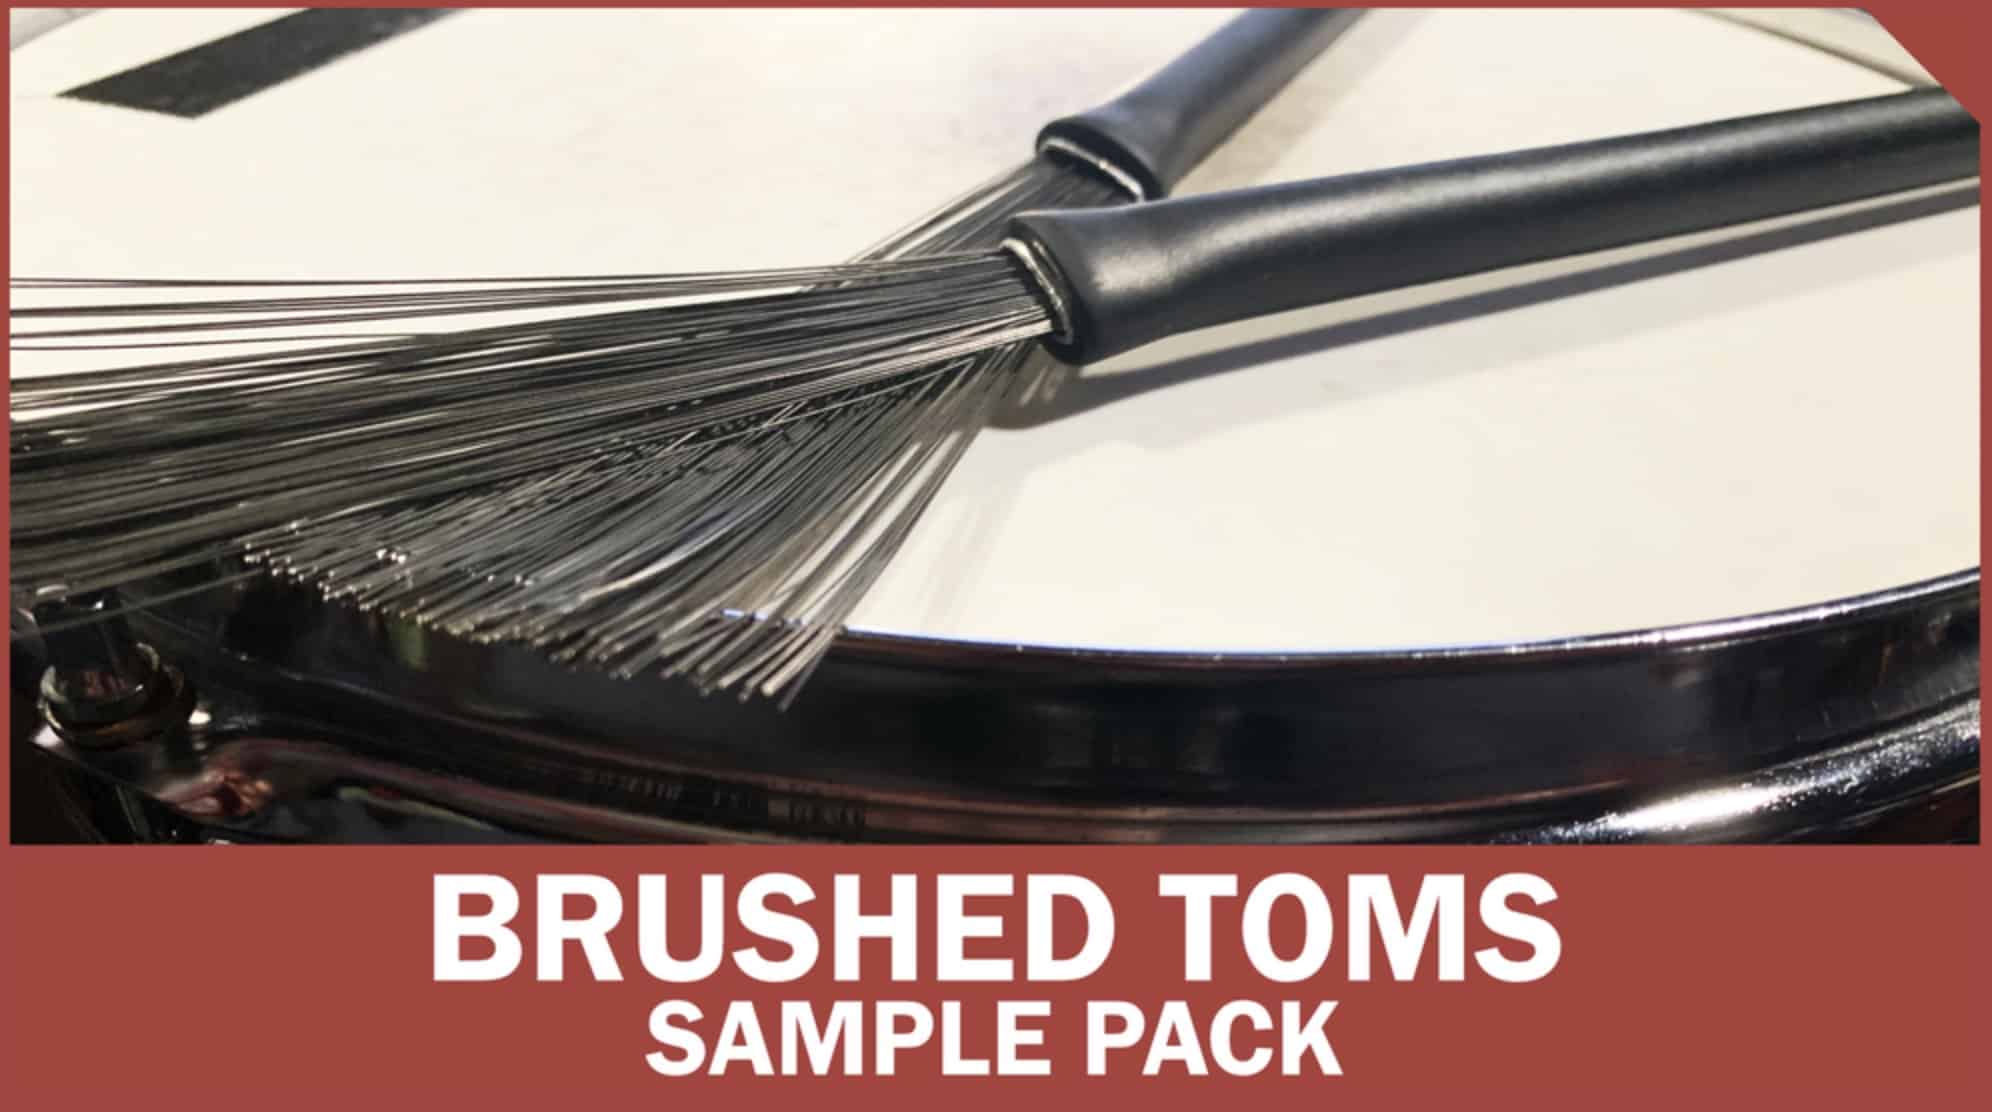 Free-Sample-Pack-Featuring-Brushed-Toms